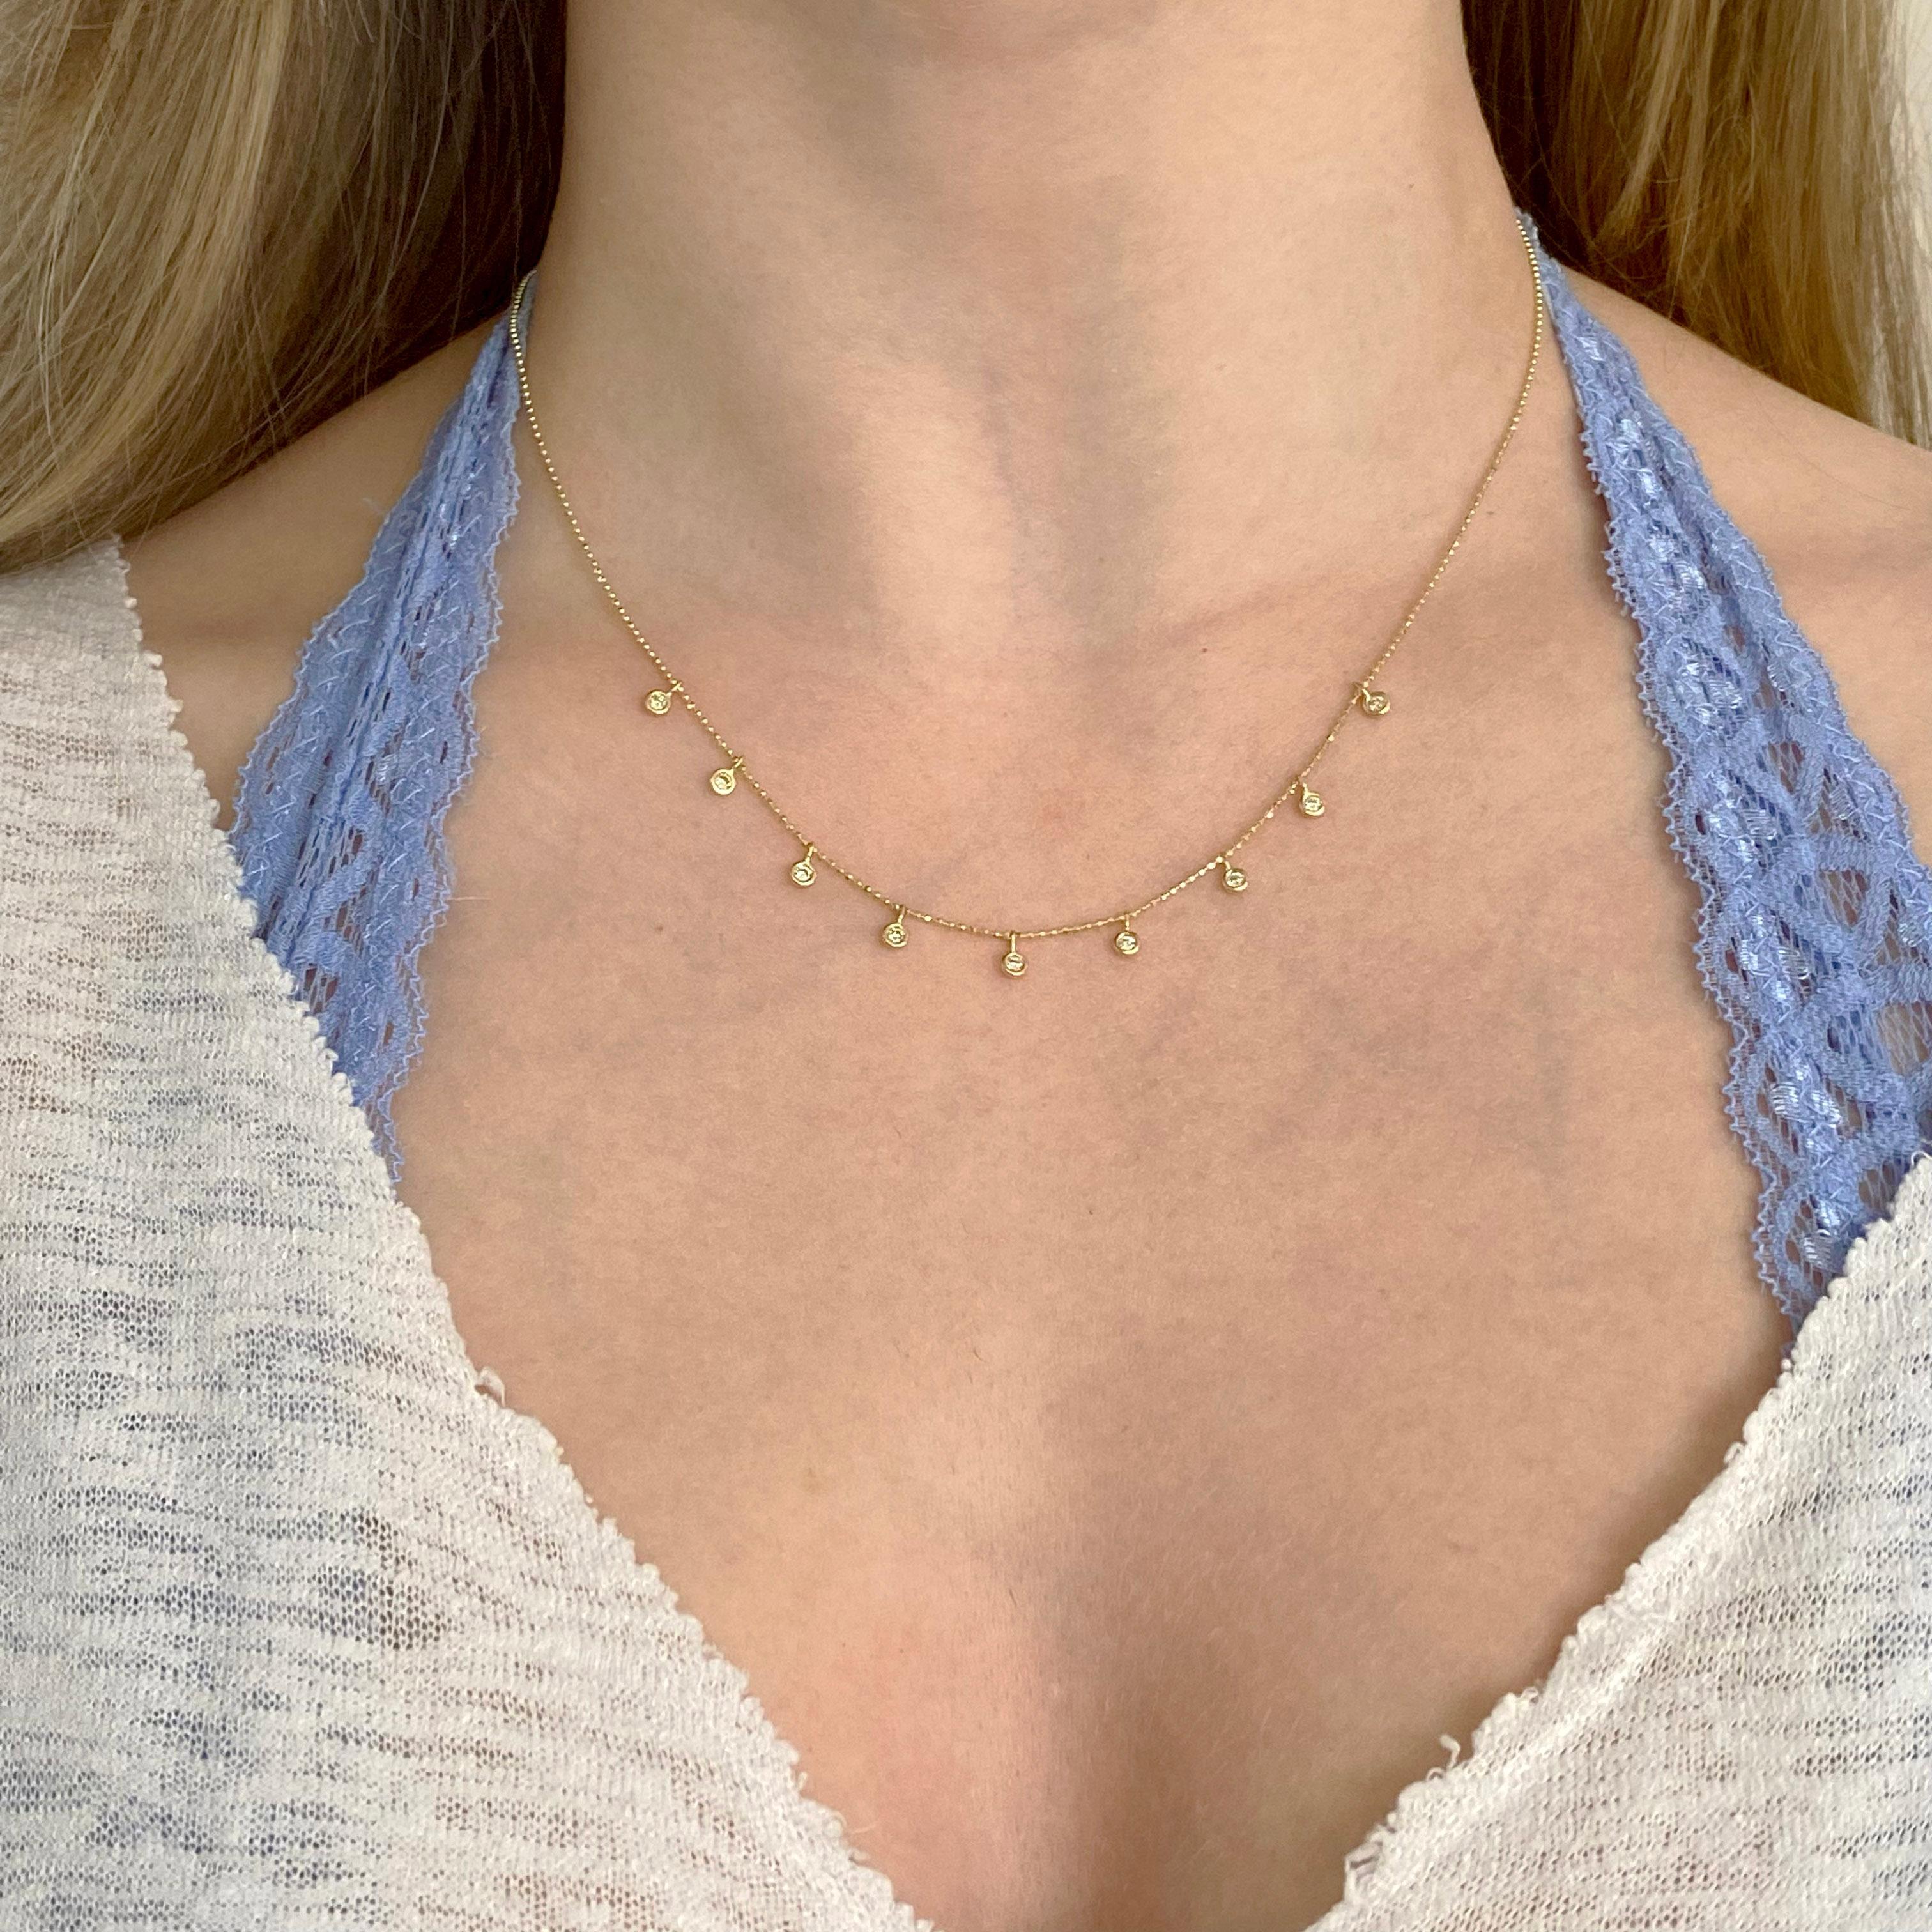 This 14 karat yellow gold diamond cut beaded chain looks stunning with the nine natural diamonds that are bezel set. The diamonds are individually set in a gorgeous bezel that are securely set and look like diamond fringe! Looking perfect as a